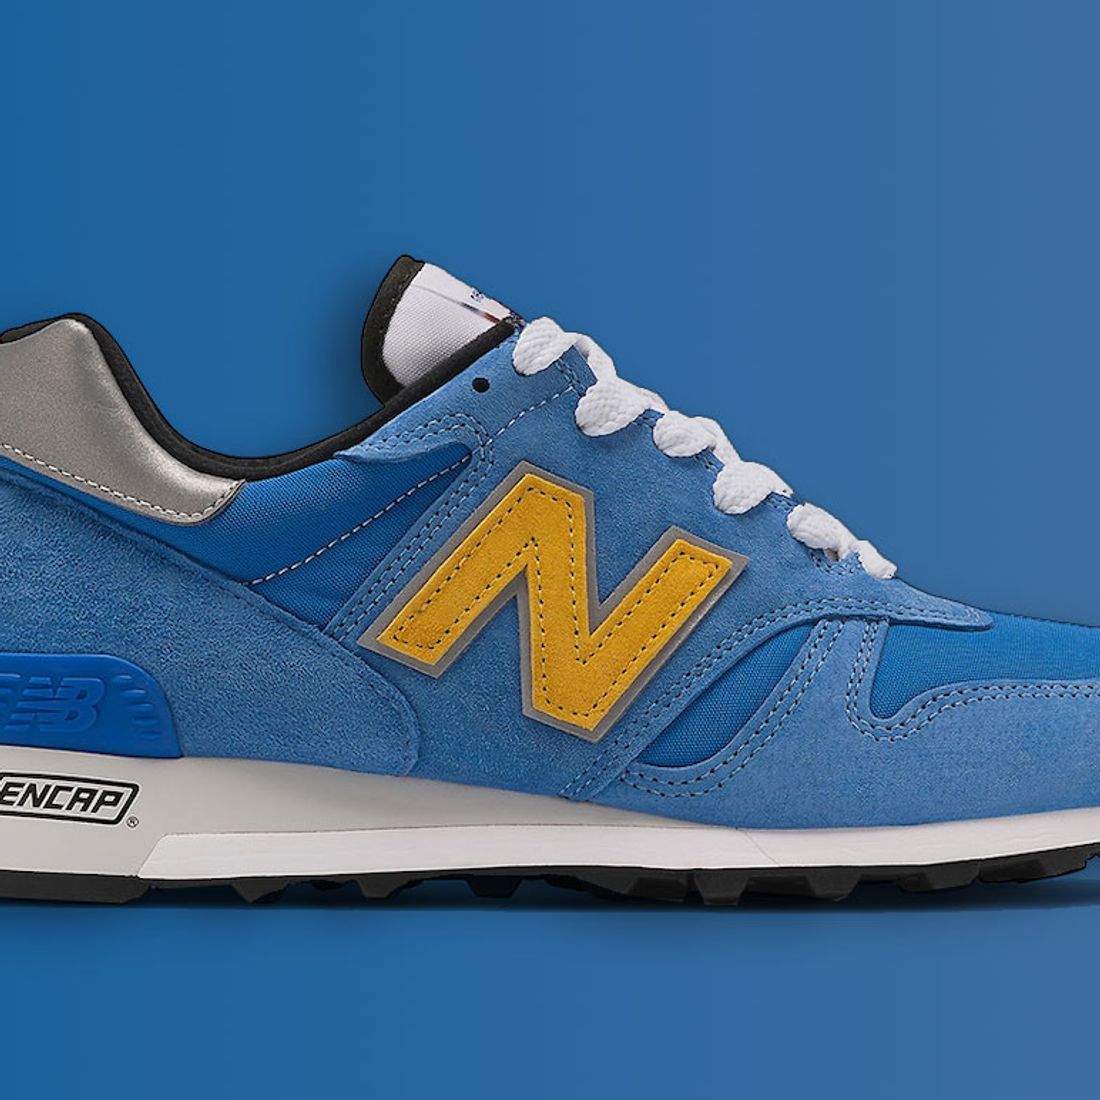 New Balance the with Beautiful Blue - Sneaker Freaker